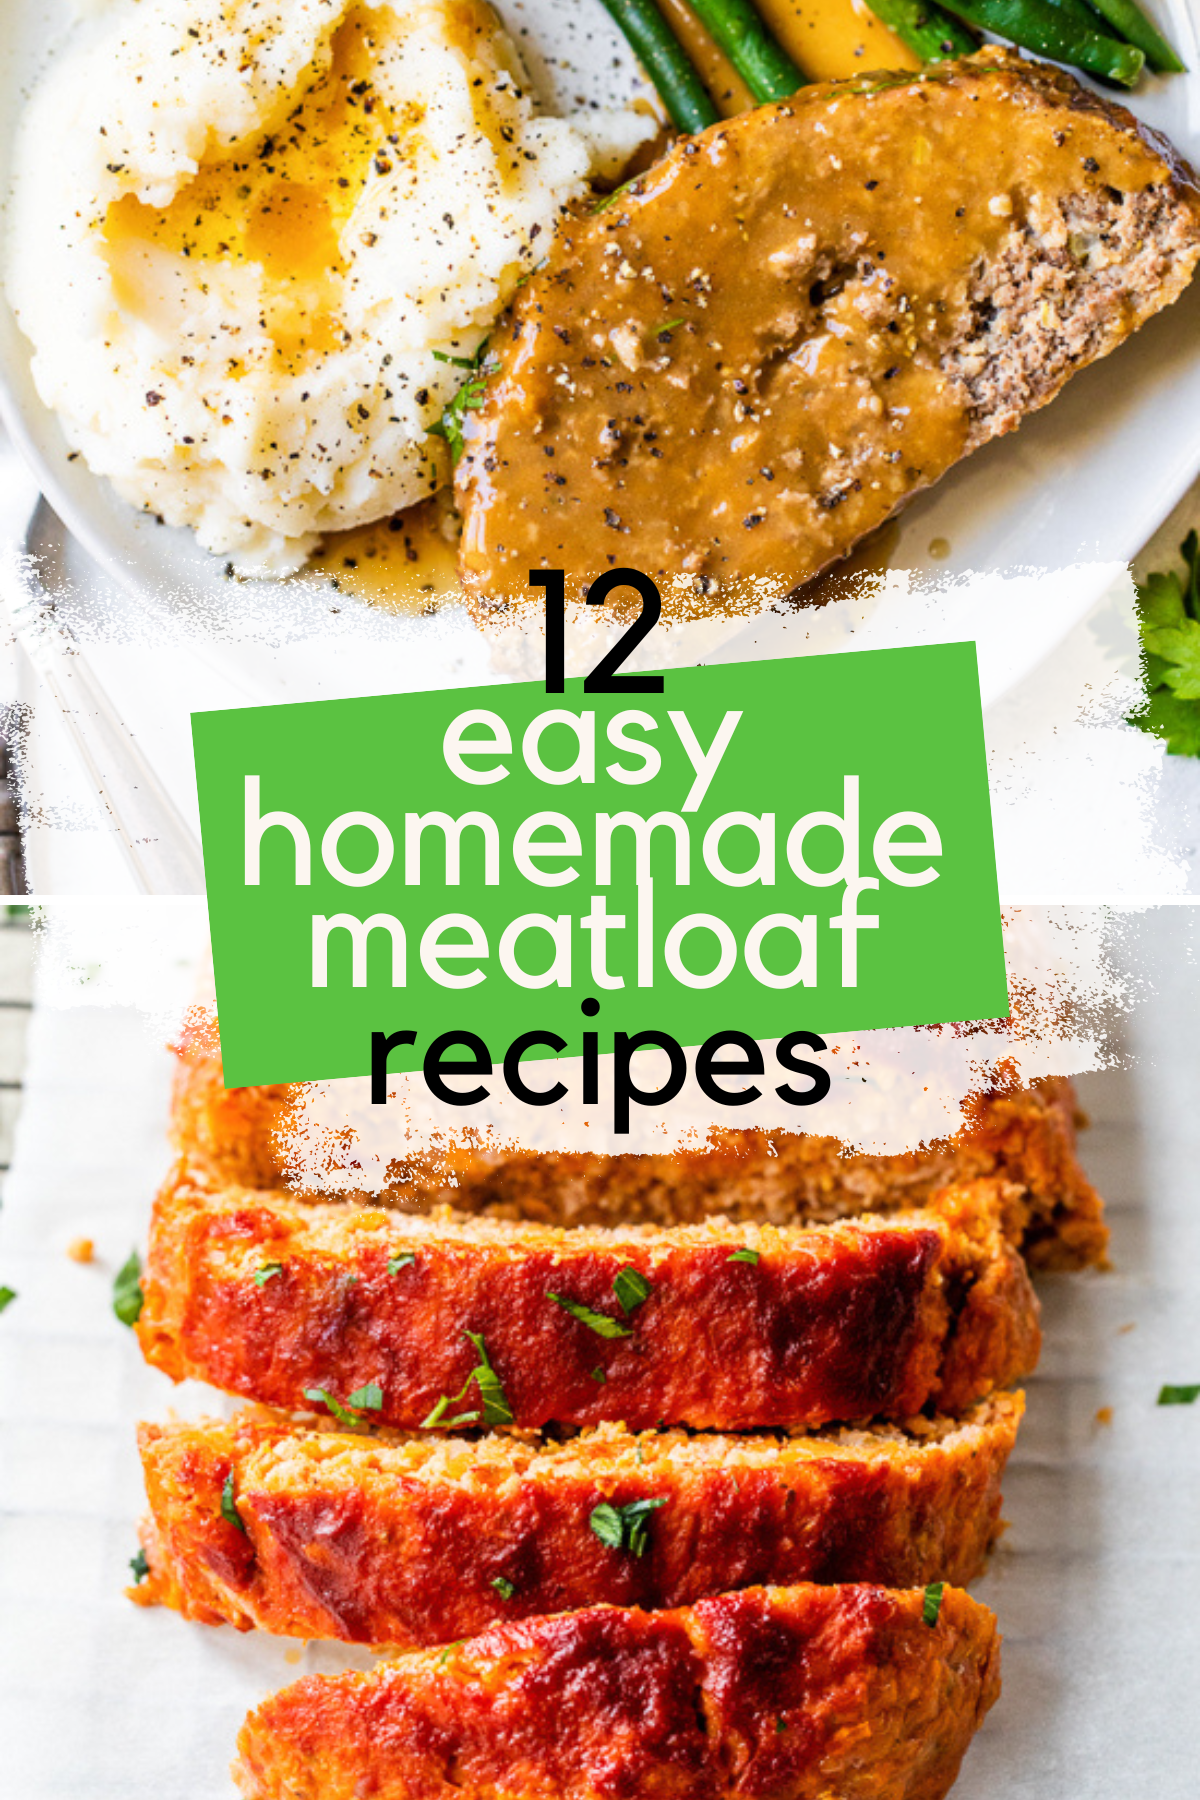 12 Easy Homemade Meatloaf Recipe Roundup